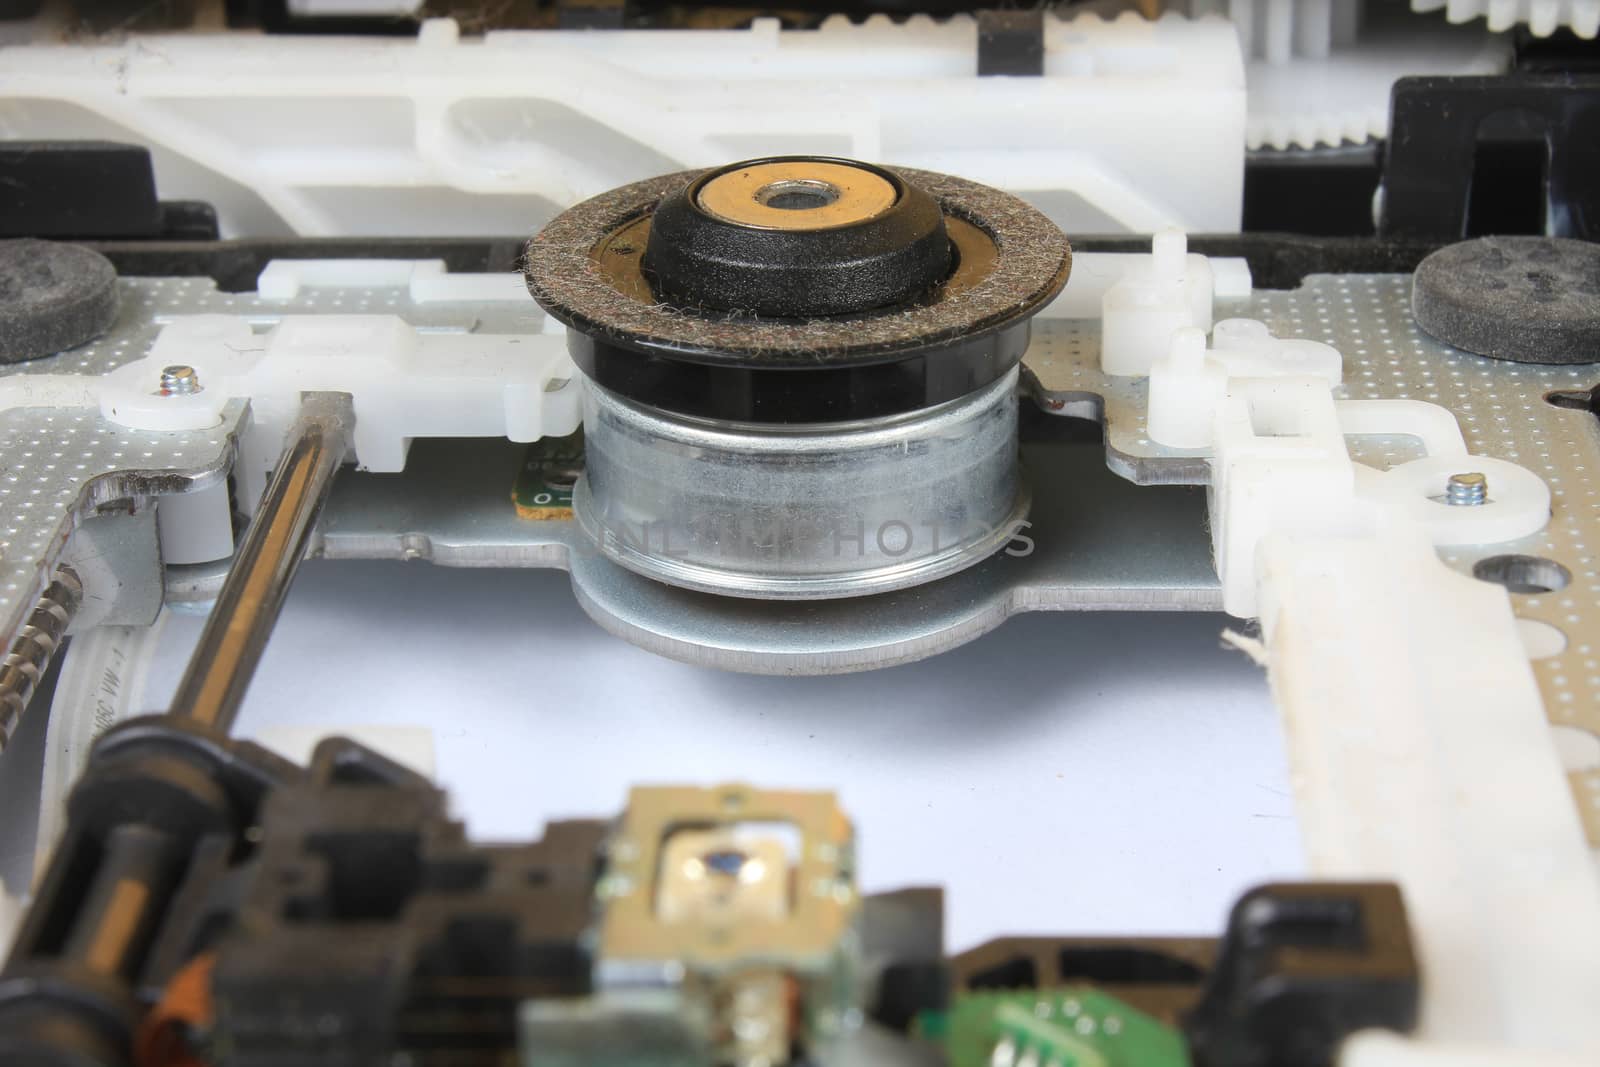 A detailed view of the motor and other parts inside an open DVD Drive of a computer